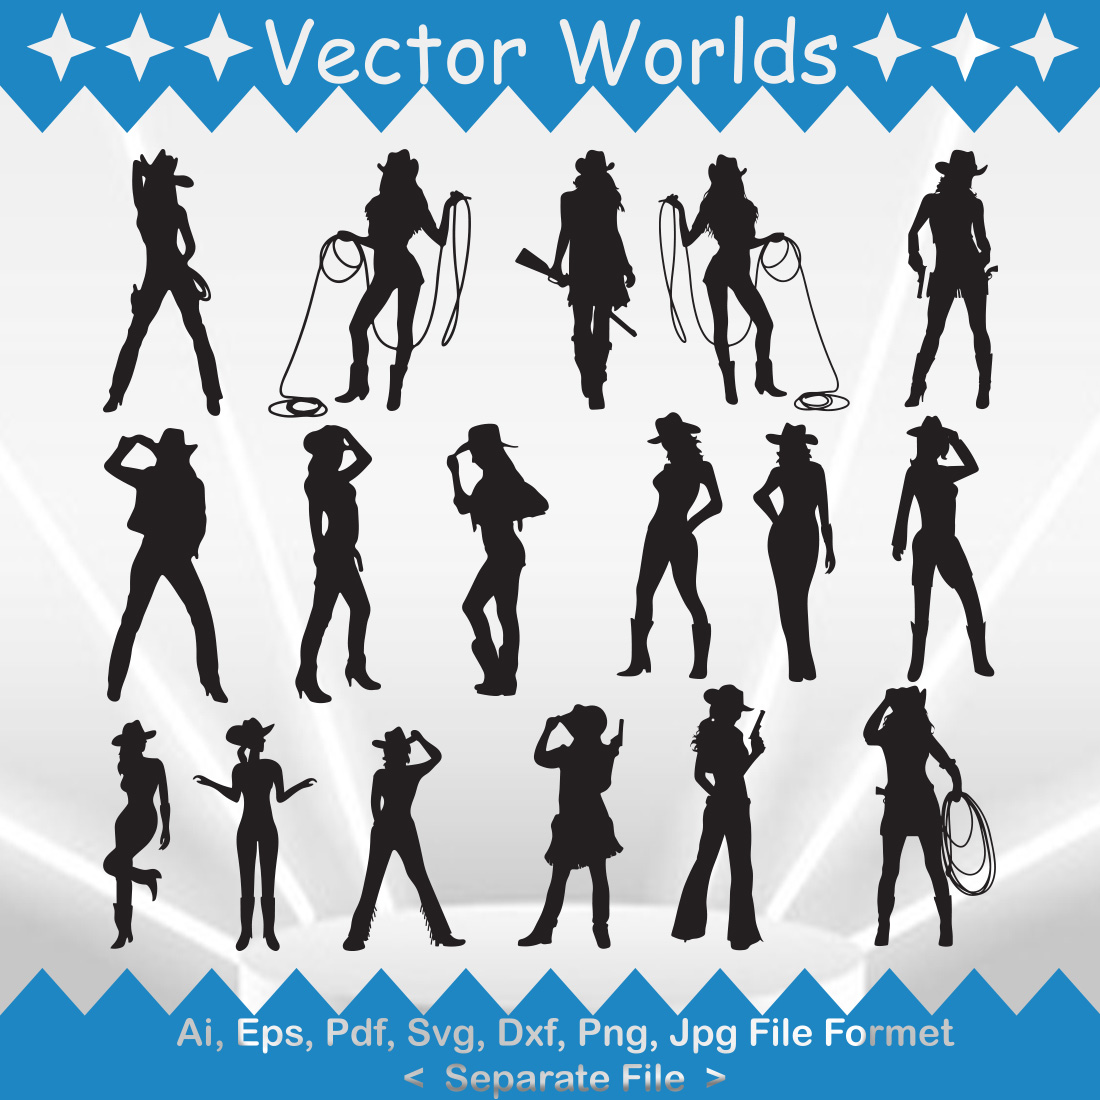 A selection of exquisite vector images of cowgirl silhouettes